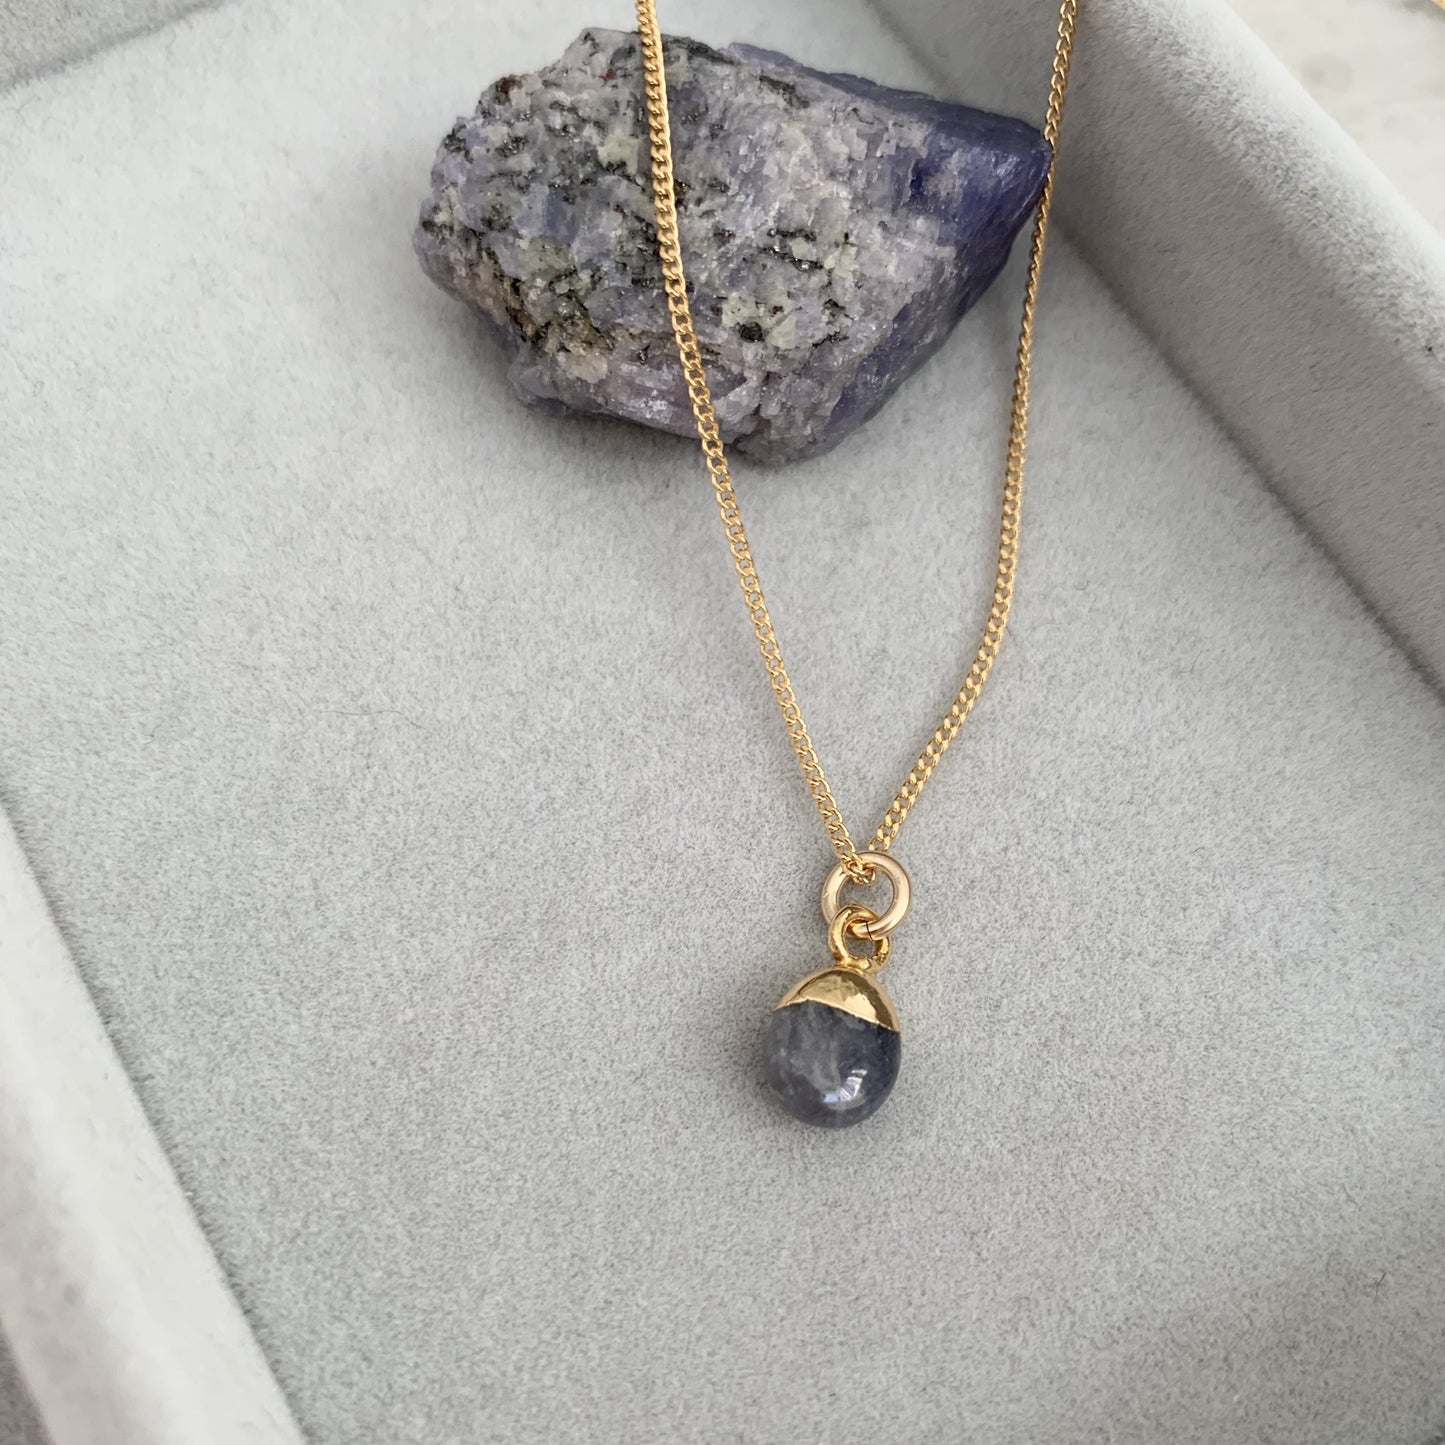 Load image into Gallery viewer, Tiny Tumbled Gemstone Necklace - Tanzanite - Decadorn
